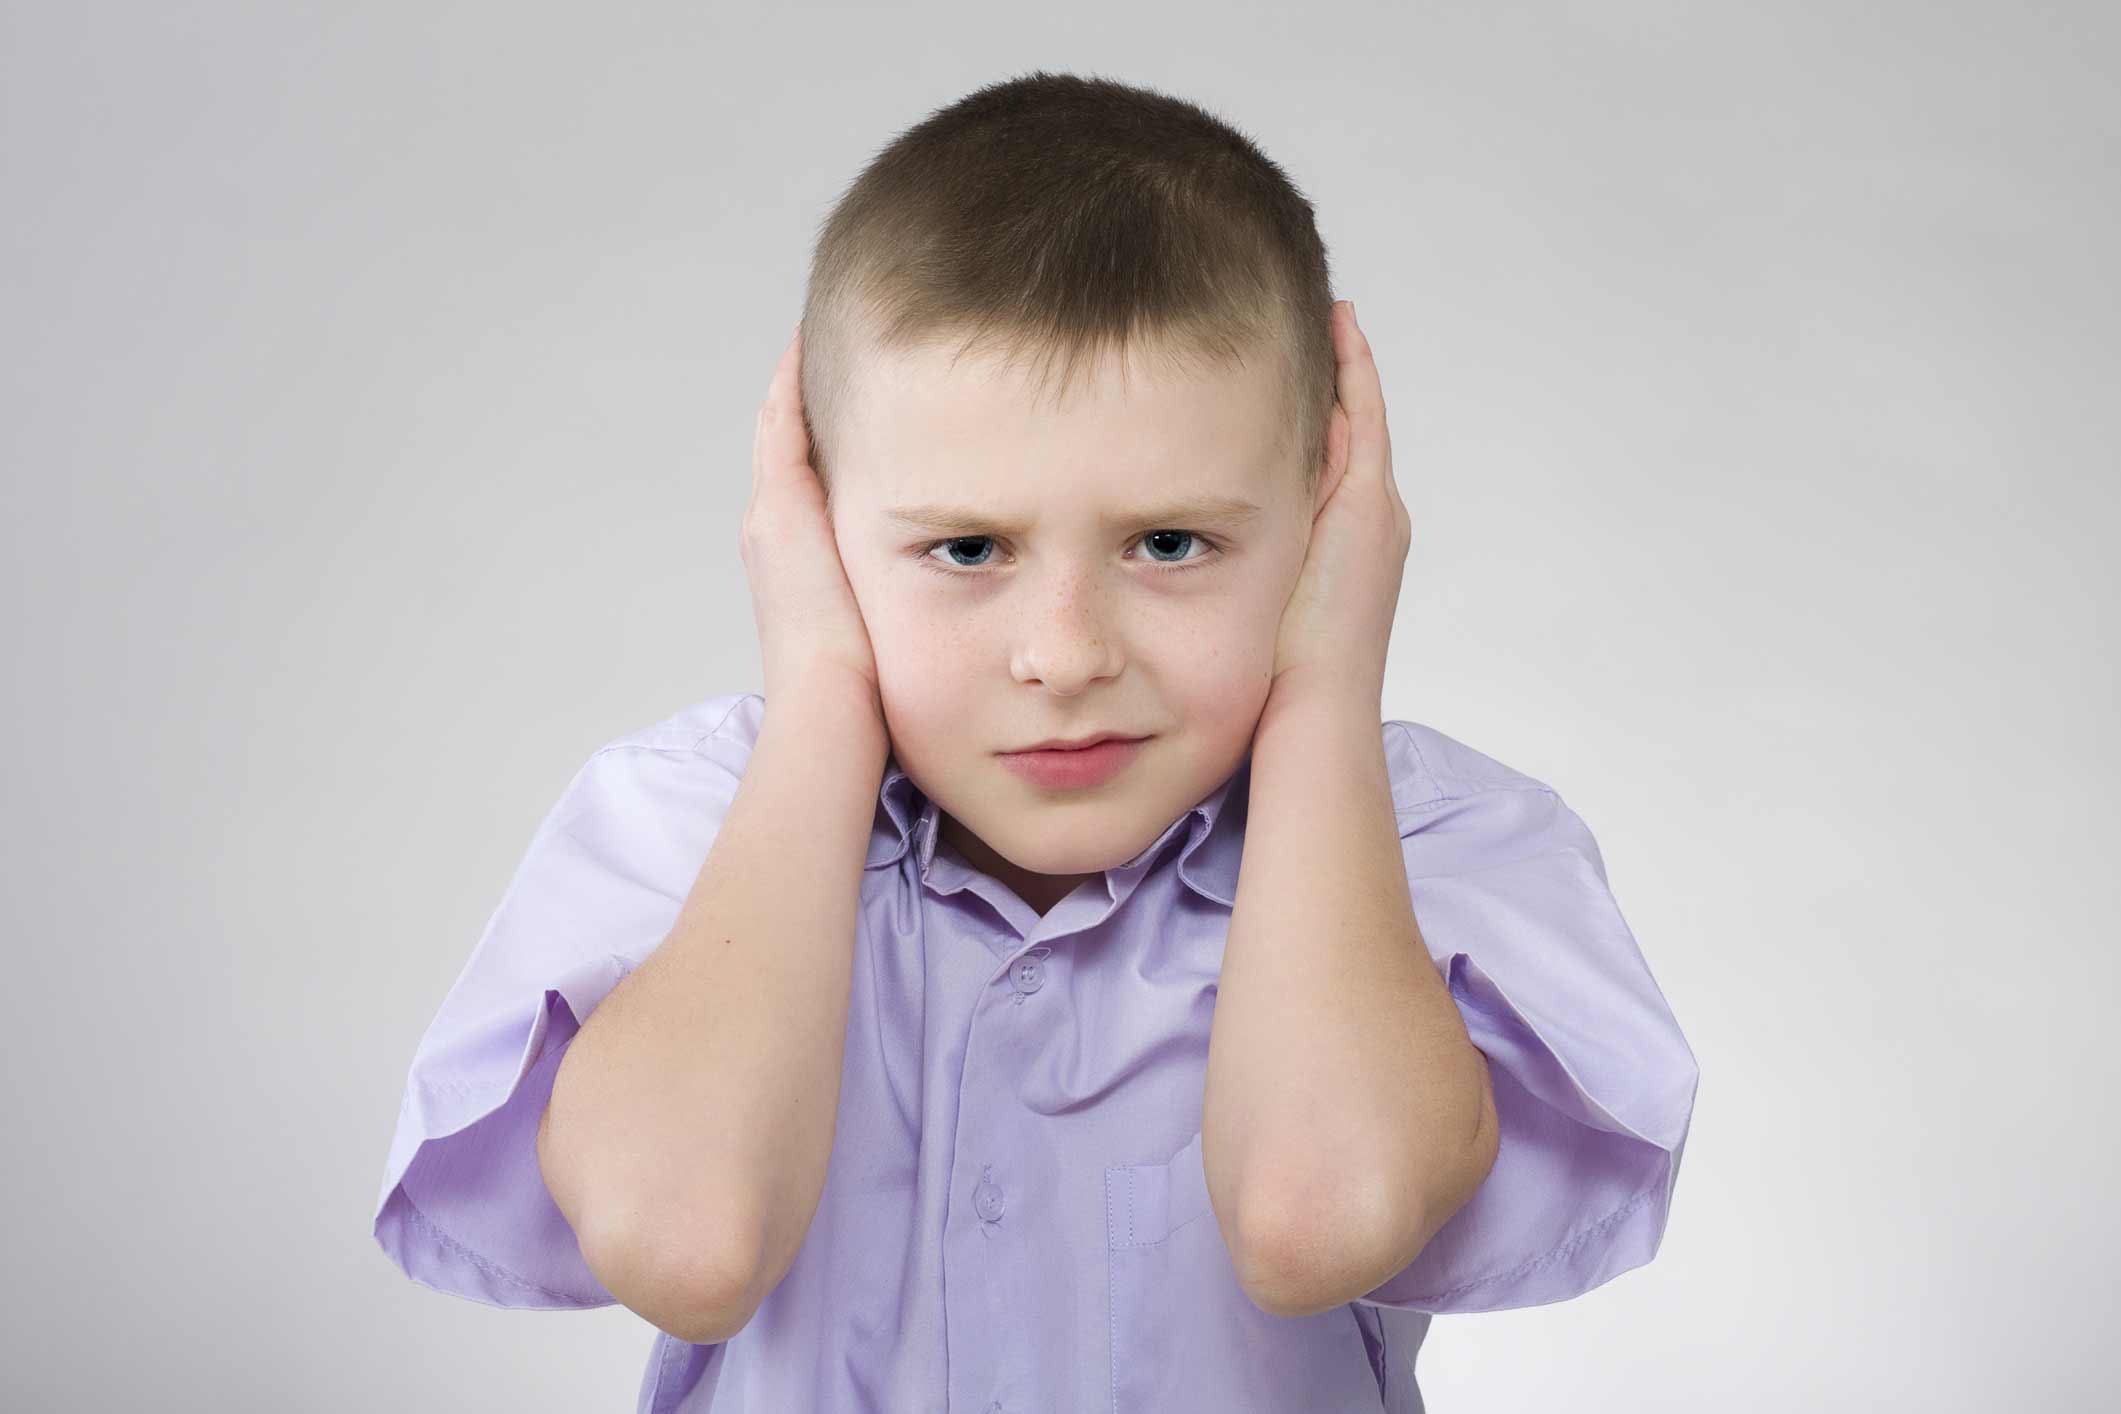 What is a Sensory Processing Disorder?